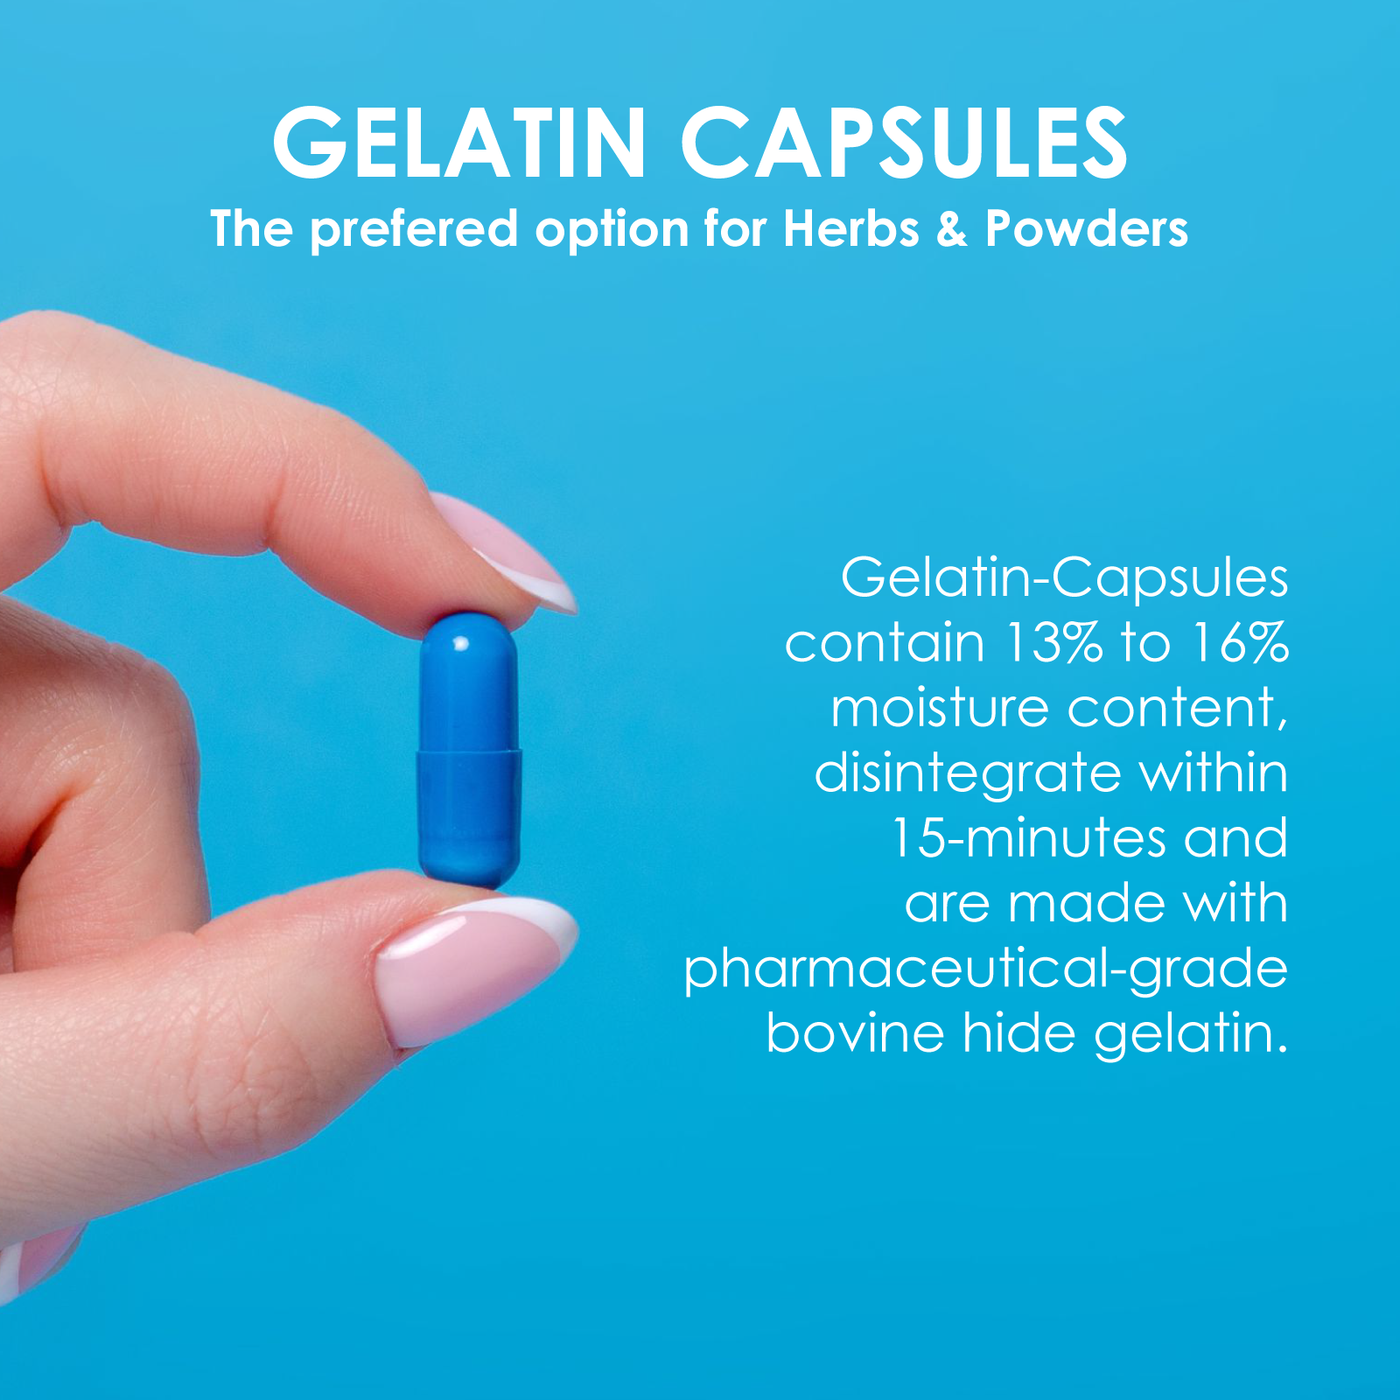 Colored Size 1 Empty Gelatin Capsules by Capsuline - Red/White - 5000 Count - 5000